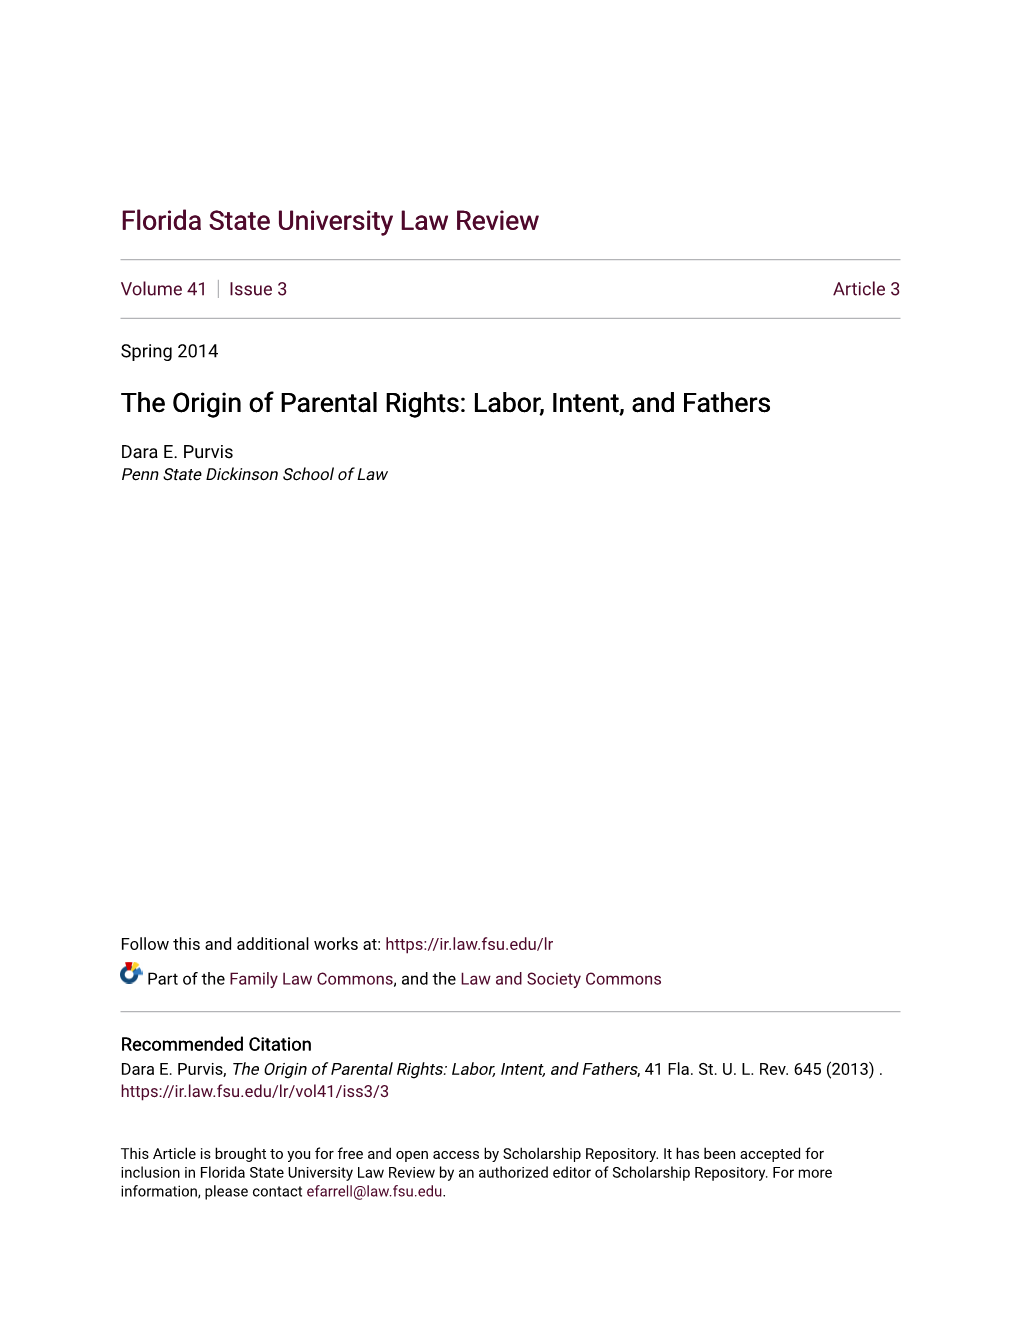 The Origin of Parental Rights: Labor, Intent, and Fathers